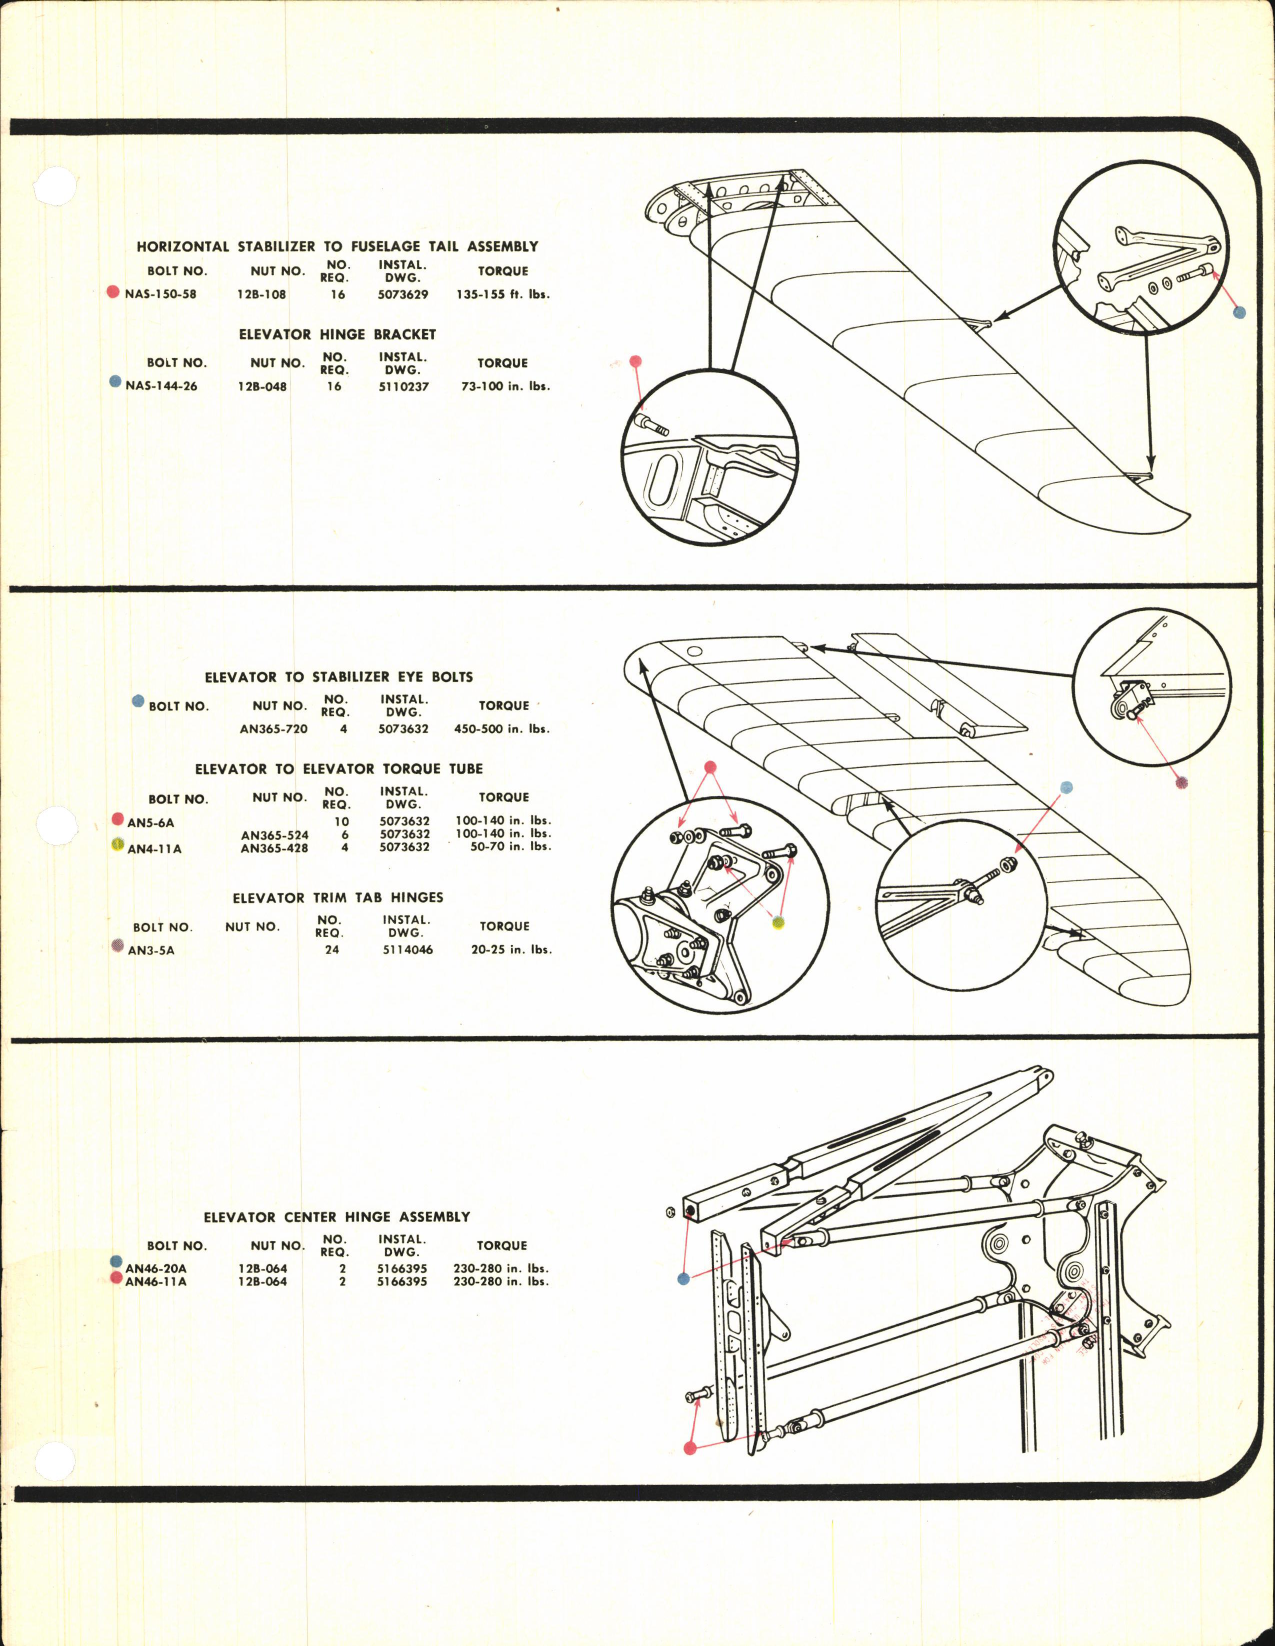 Sample page 7 from AirCorps Library document: C-54, C-54A, and C-54B Torque Values